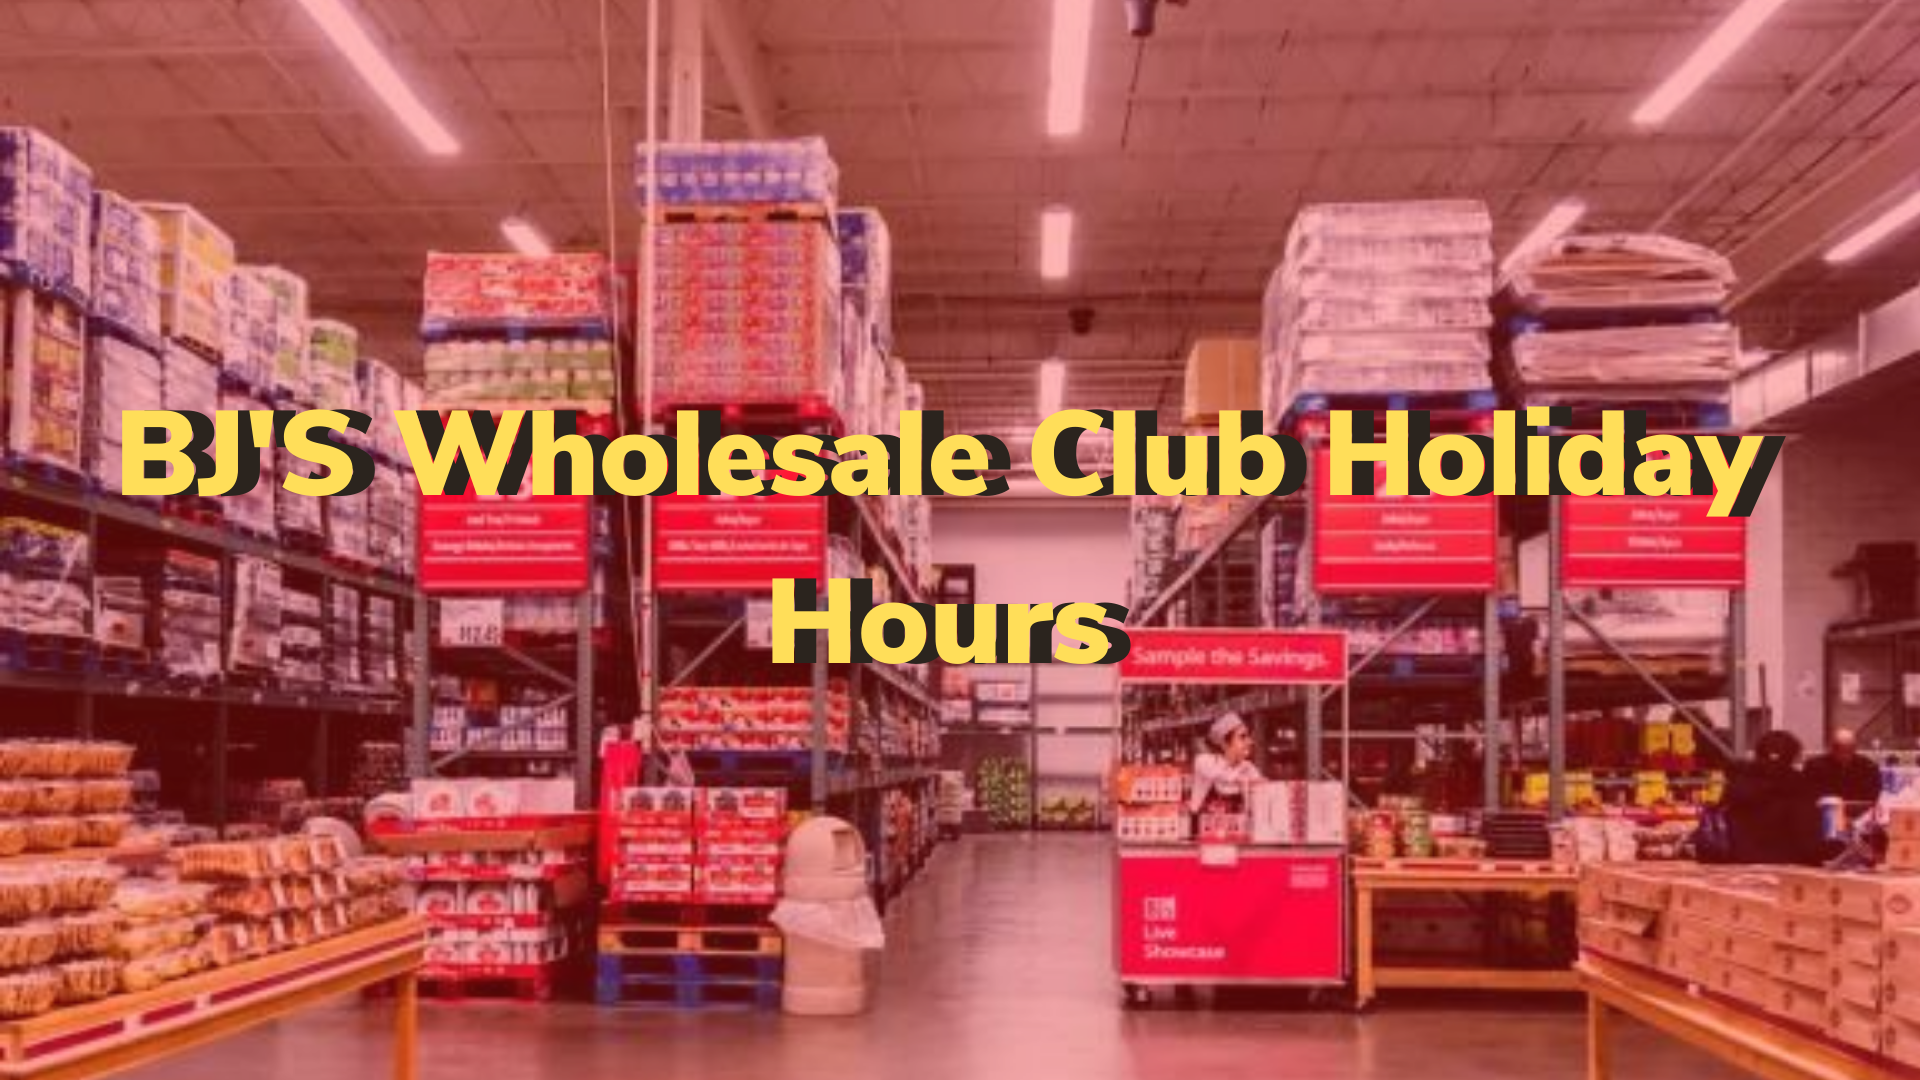 bj's wholesale holiday hours